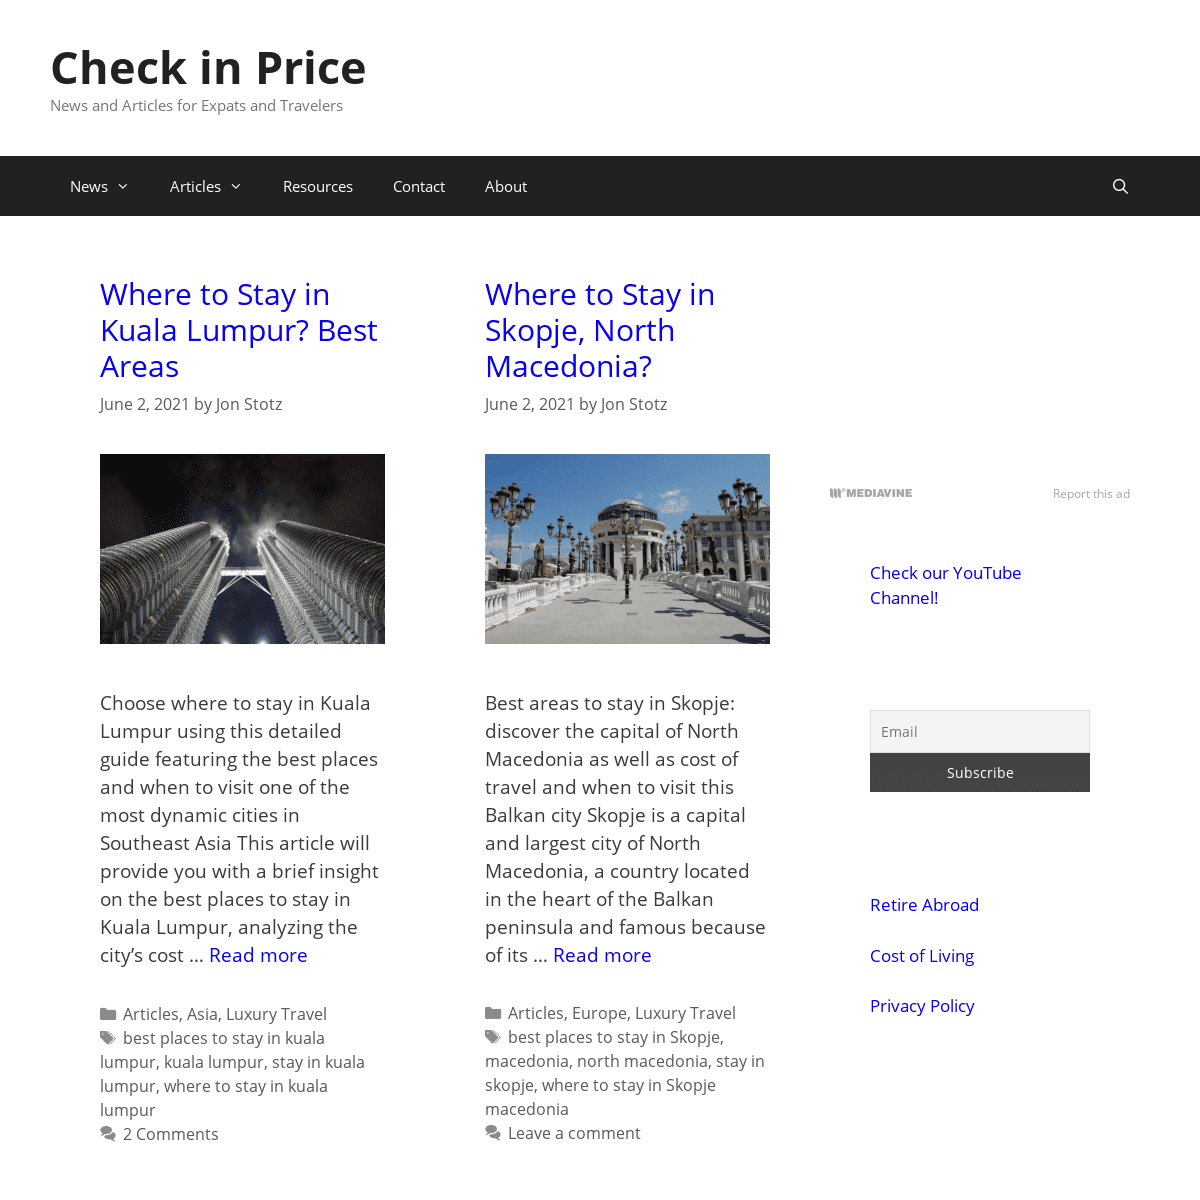 A complete backup of https://checkinprice.com